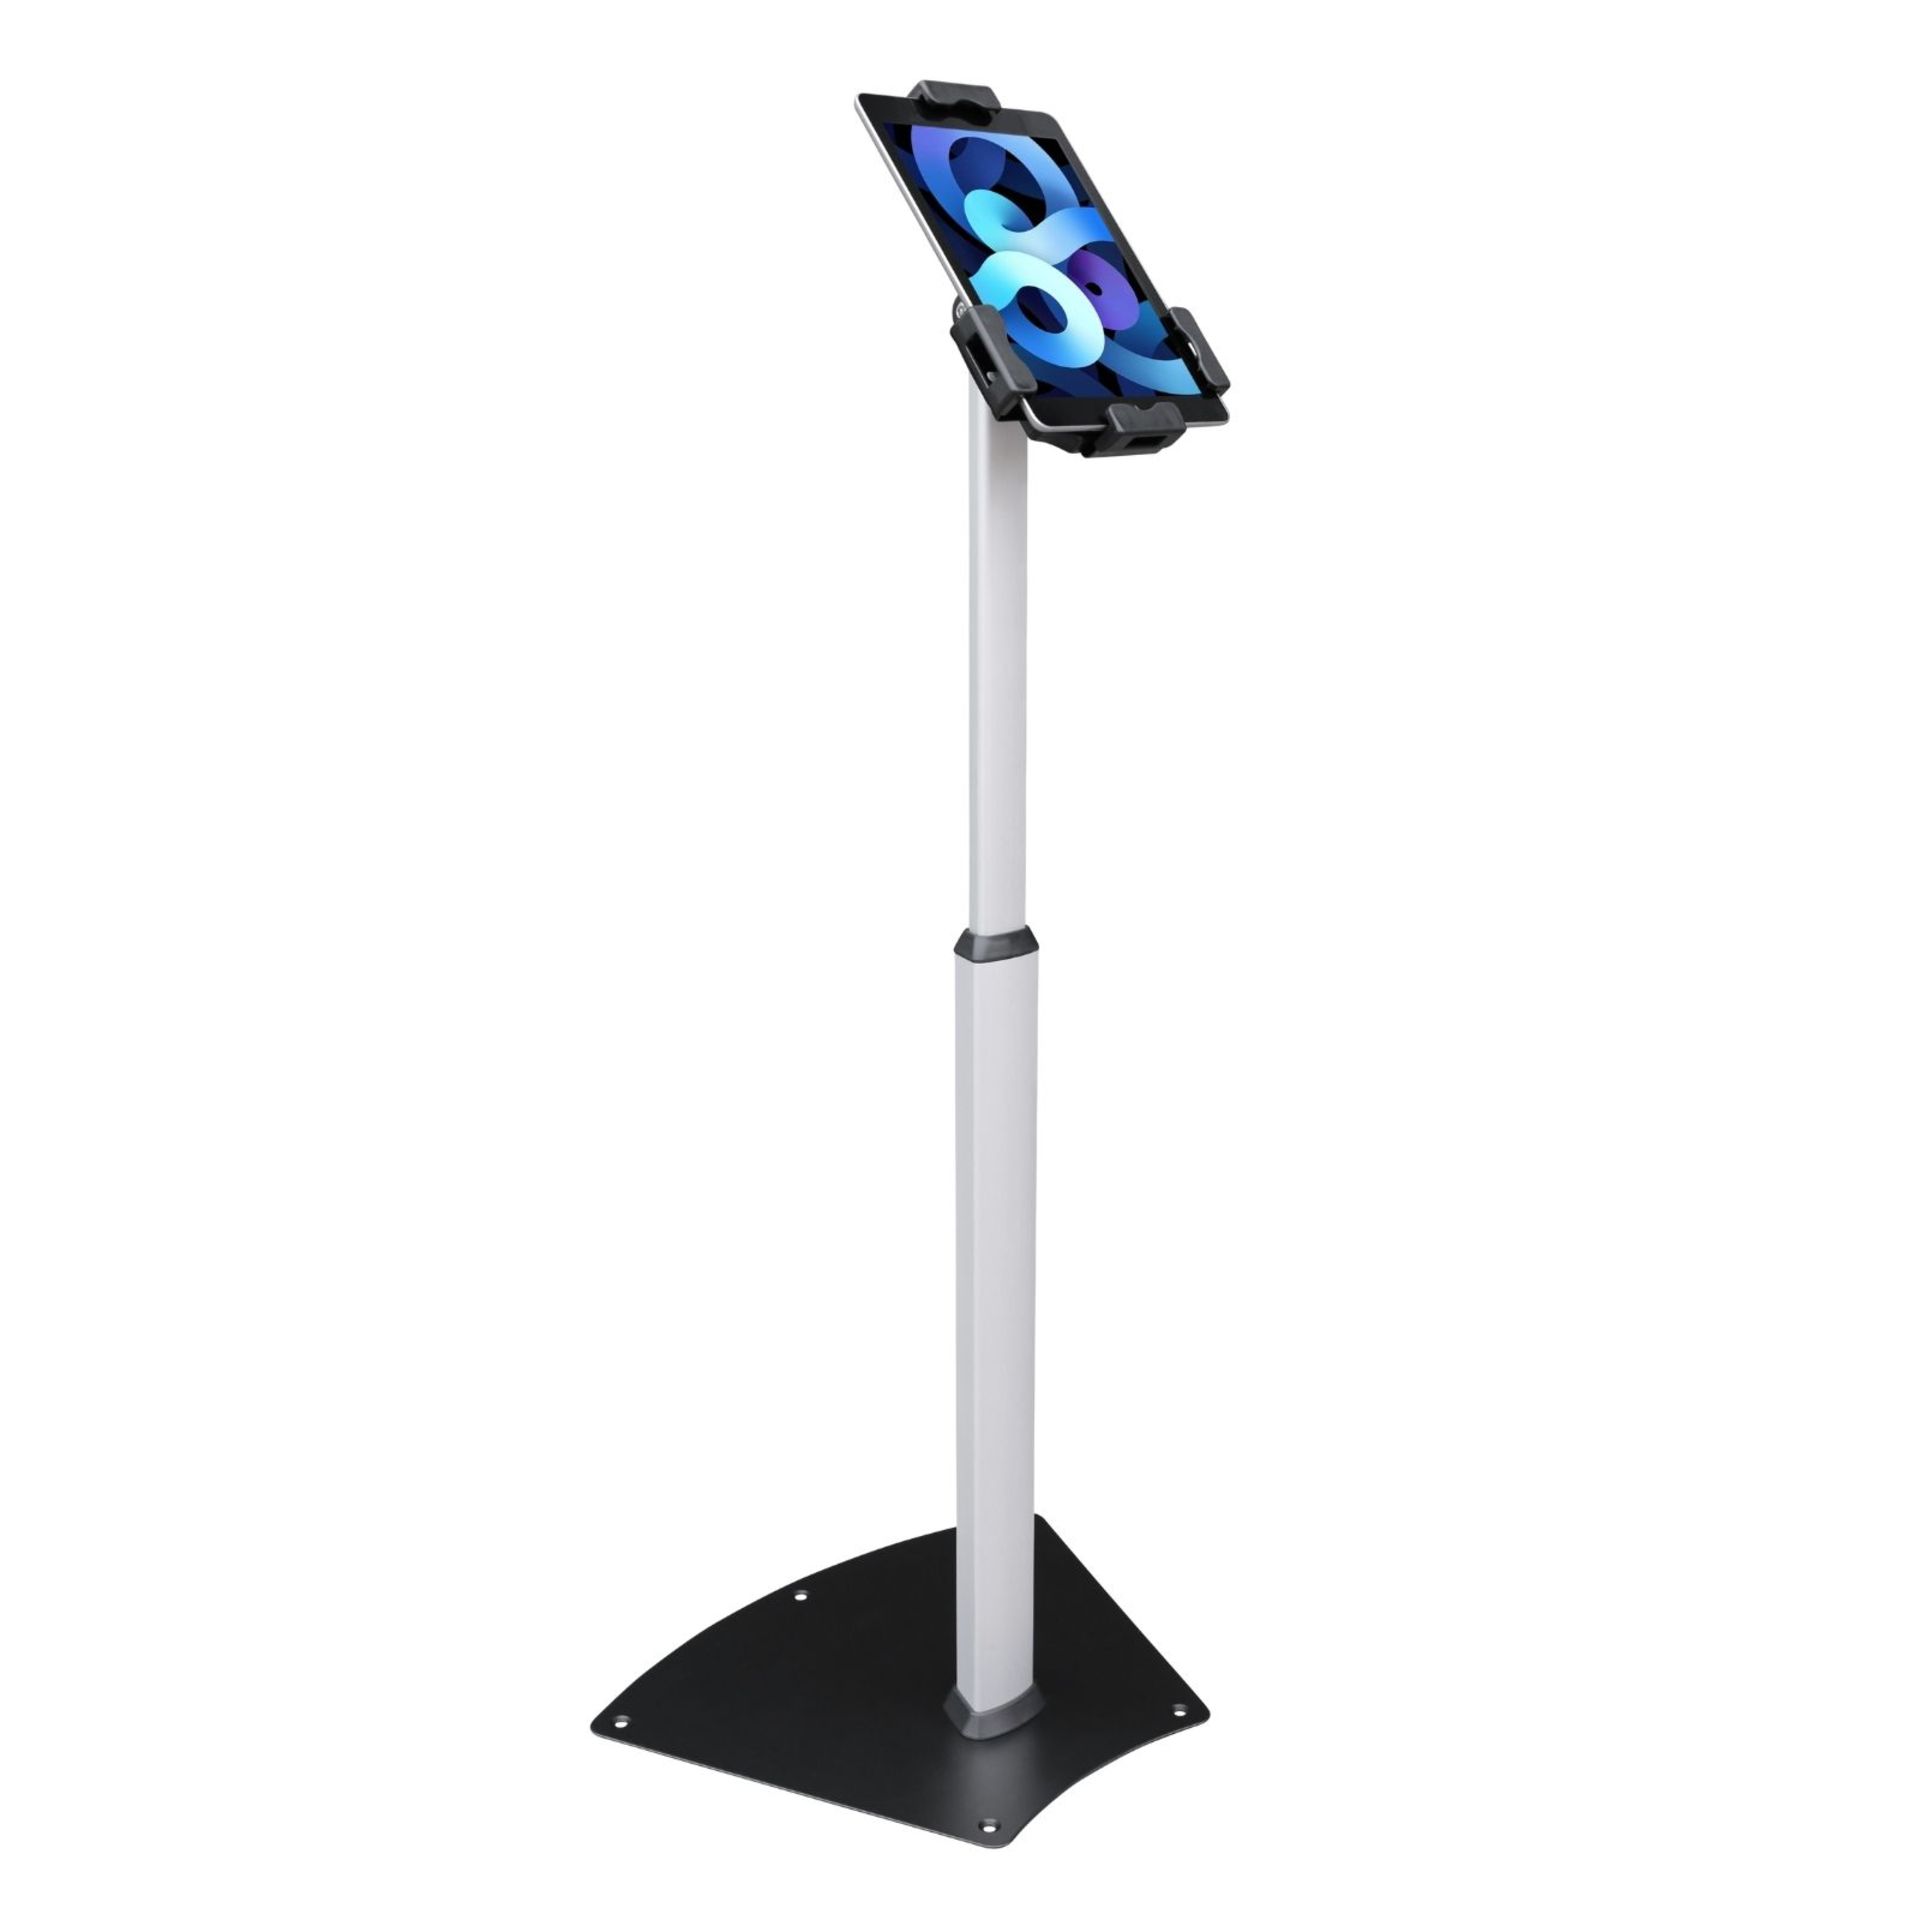 150 X FLOOR DISPLAY STANDS FOR IPADS & TABLETS, ANTI-THEFT, ADJUSTABLE HEIGHT. RRP £18,000